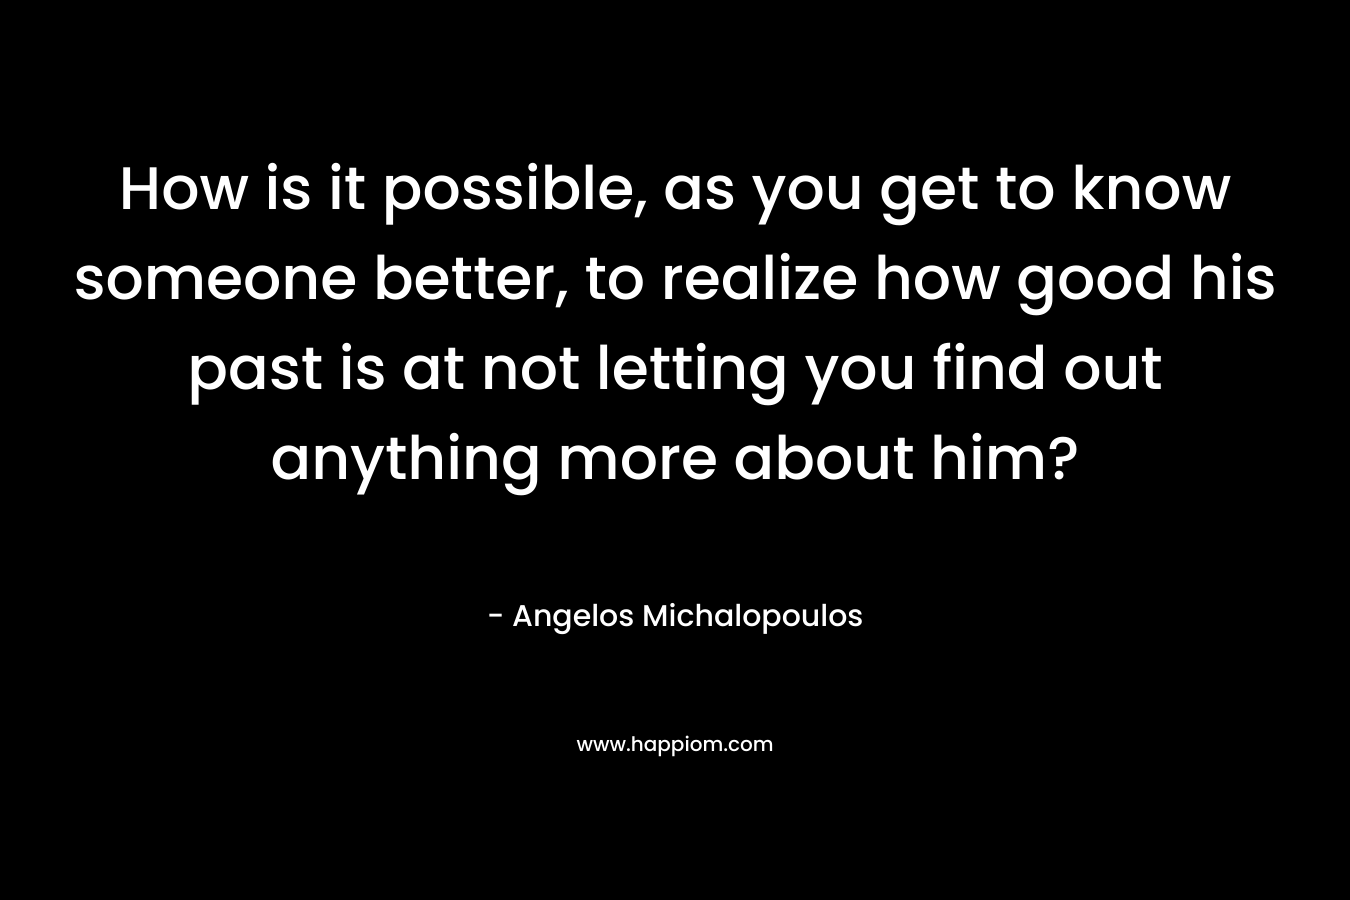 How is it possible, as you get to know someone better, to realize how good his past is at not letting you find out anything more about him? – Angelos Michalopoulos